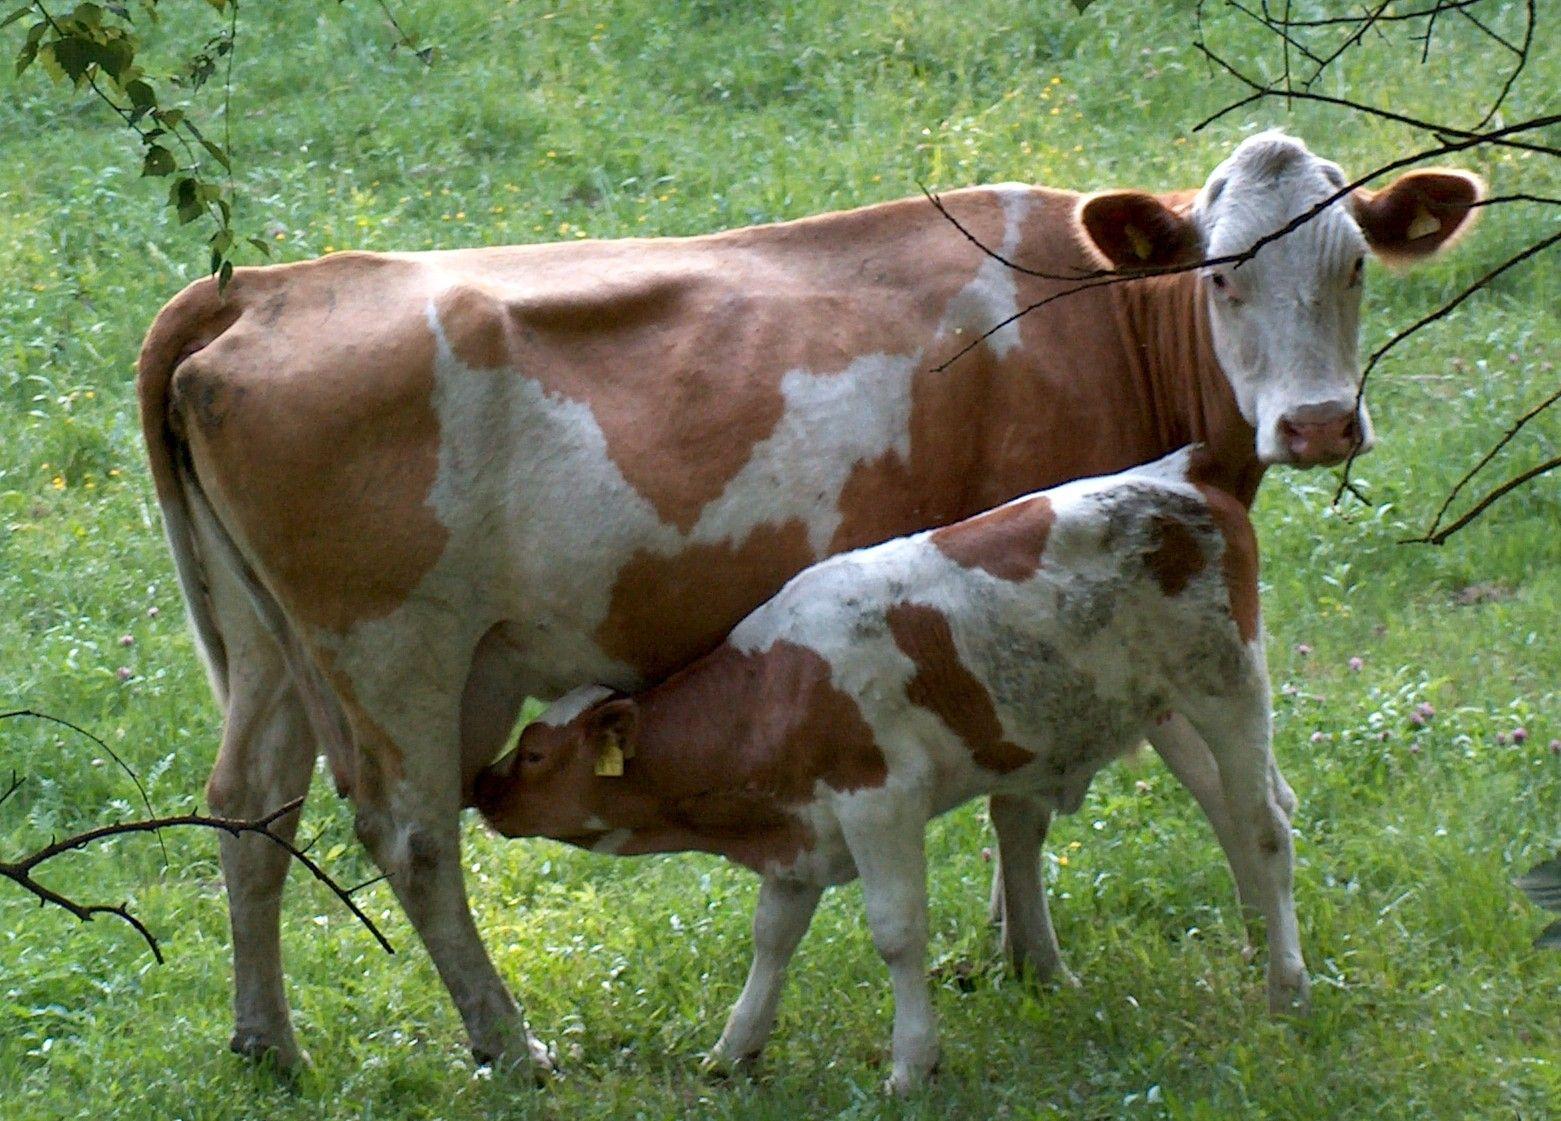 Cow and Calf Photo. Baby cows